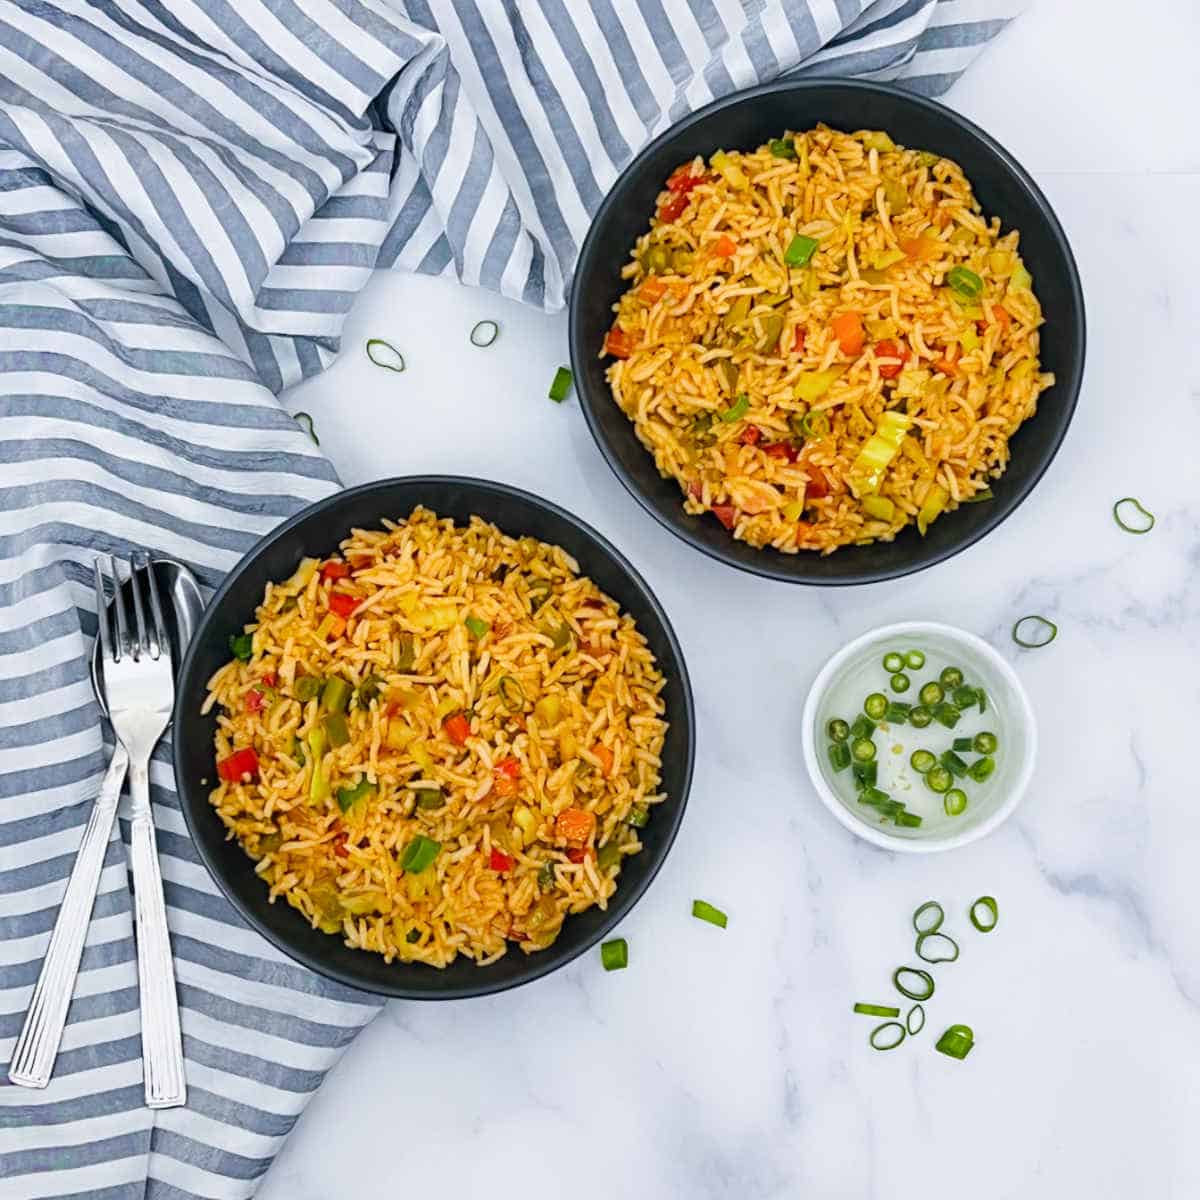 Bowls of vegetable fried rice on a marble surface.